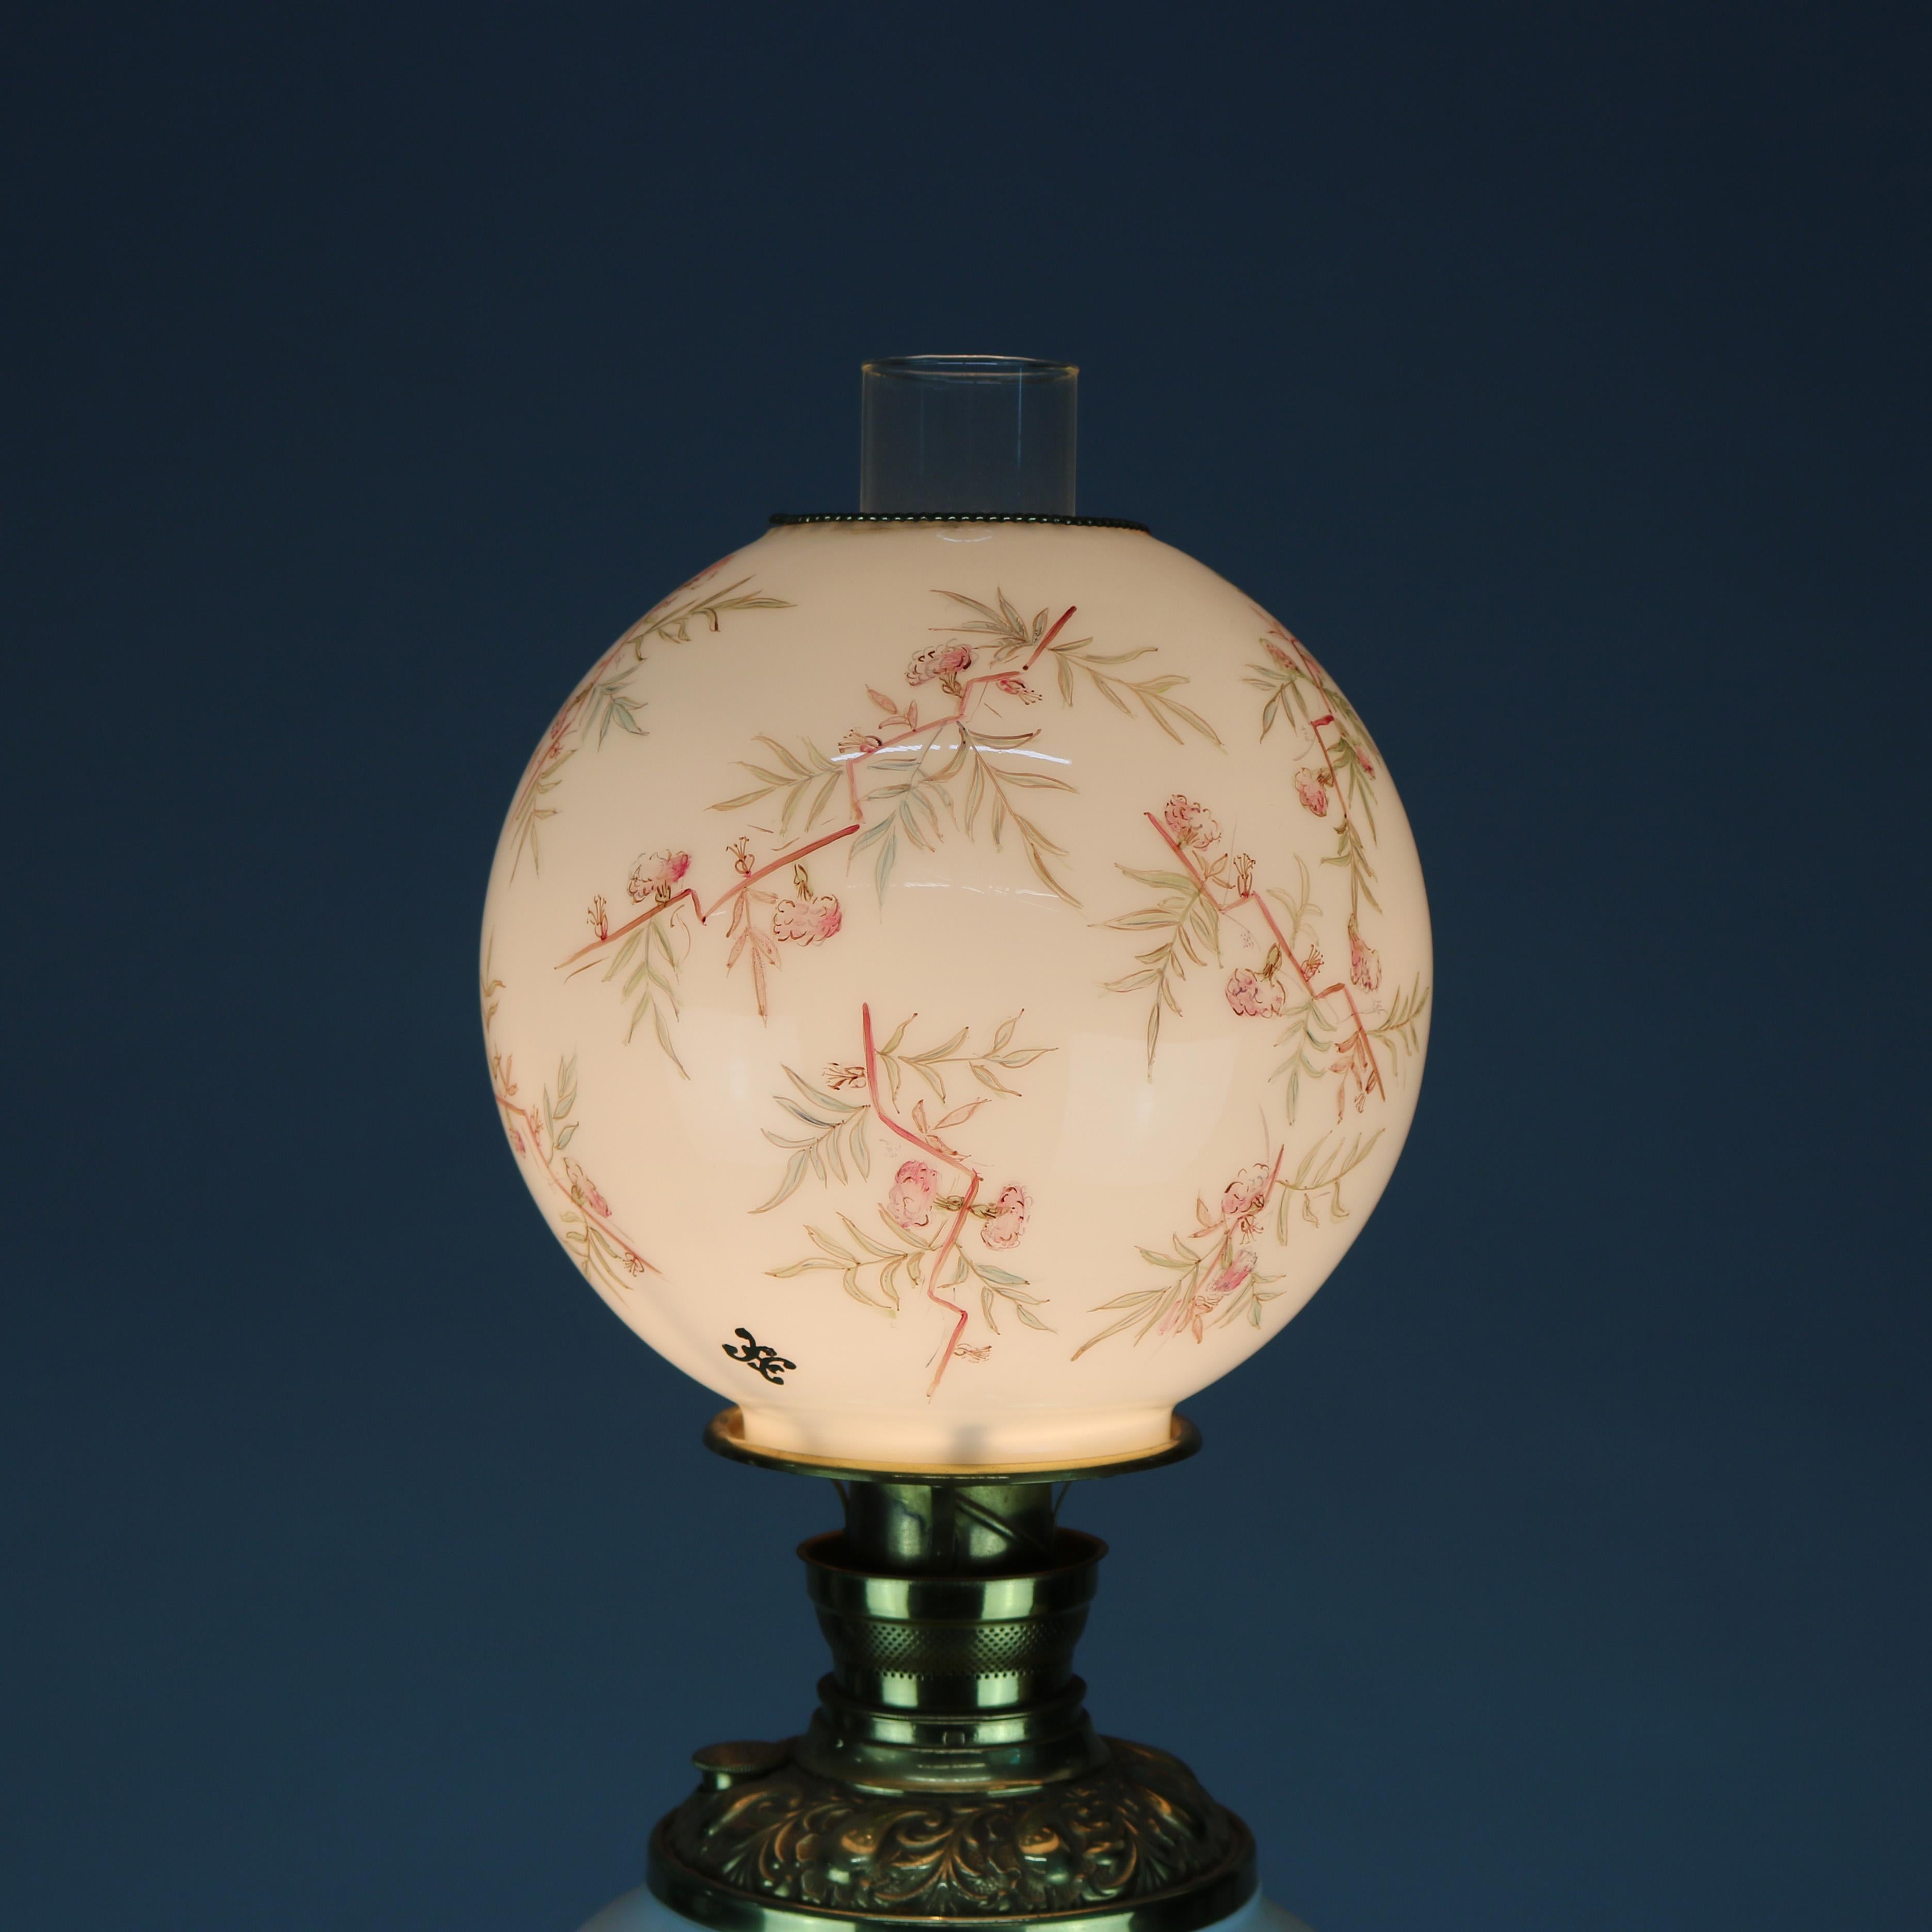 19th Century Antique Hand Painted Gone with the Wind Parlor Lamp, circa 1890